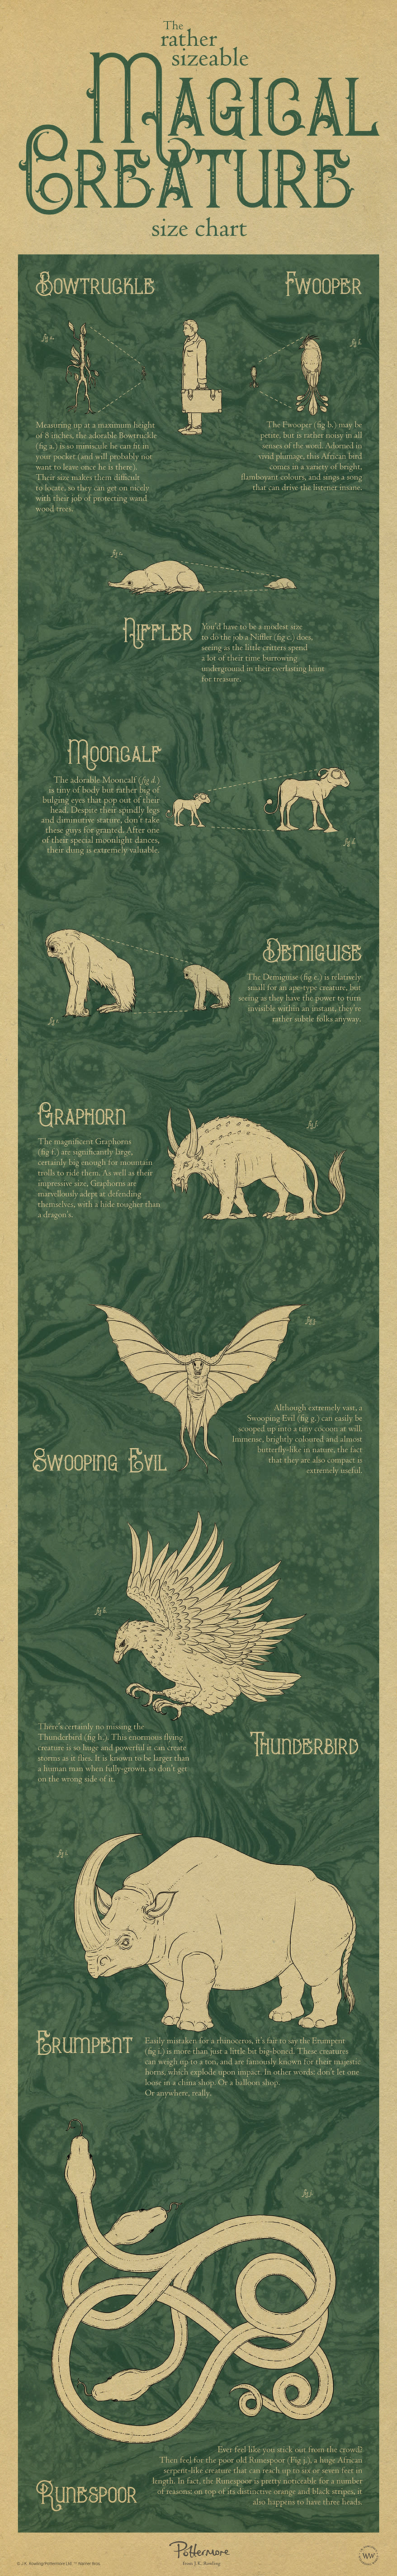 The rather sizeable magical creature size chart illustration